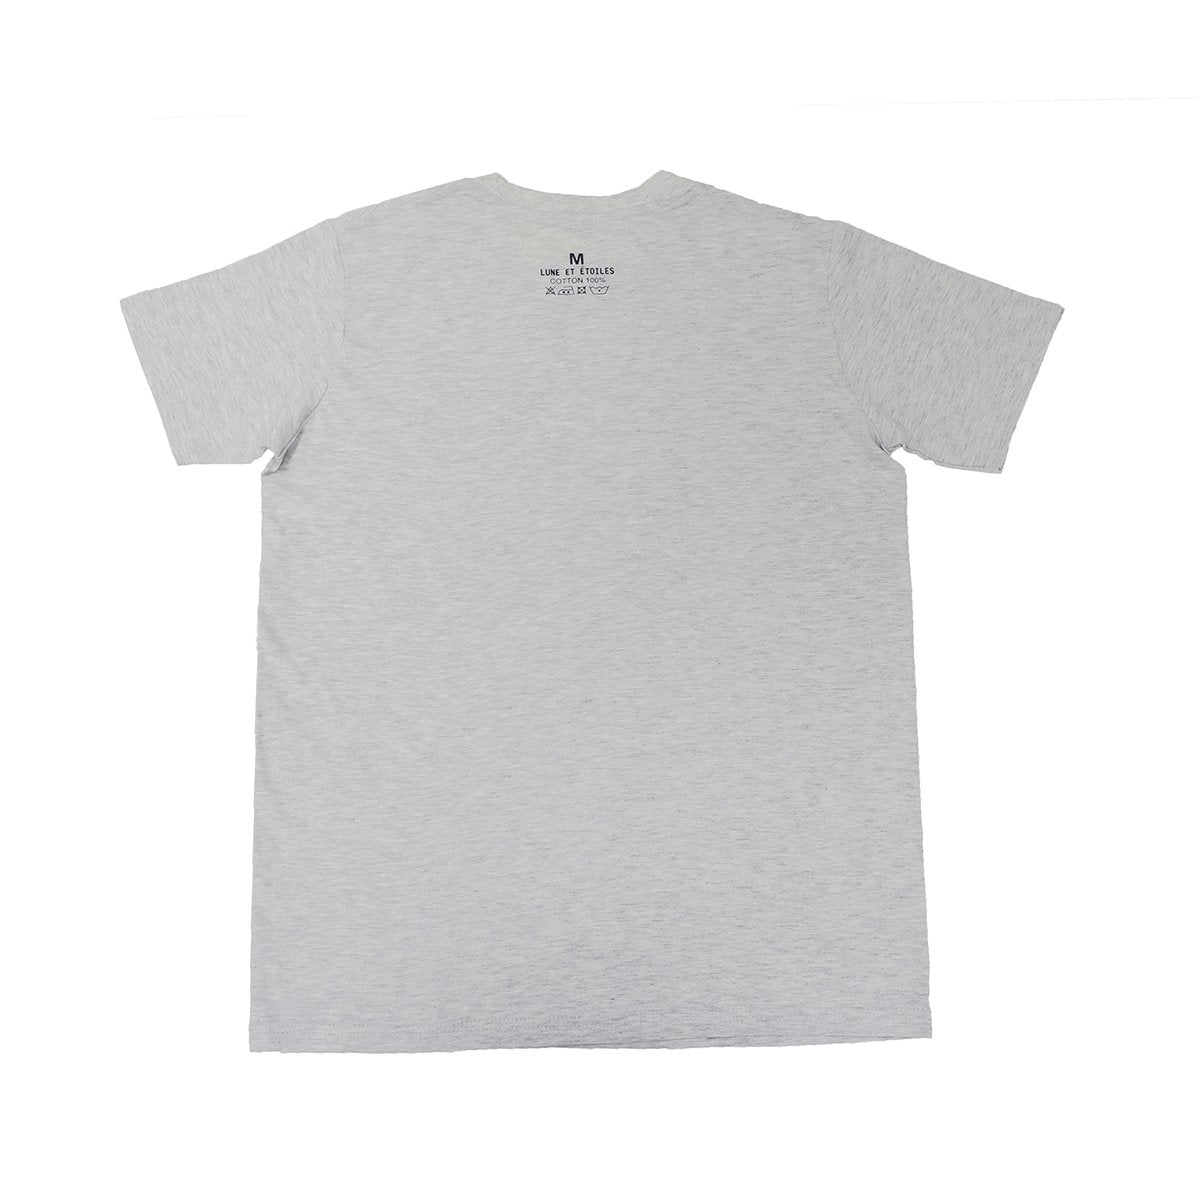 Smiling Face Tee (Grey) - Chainless Brain